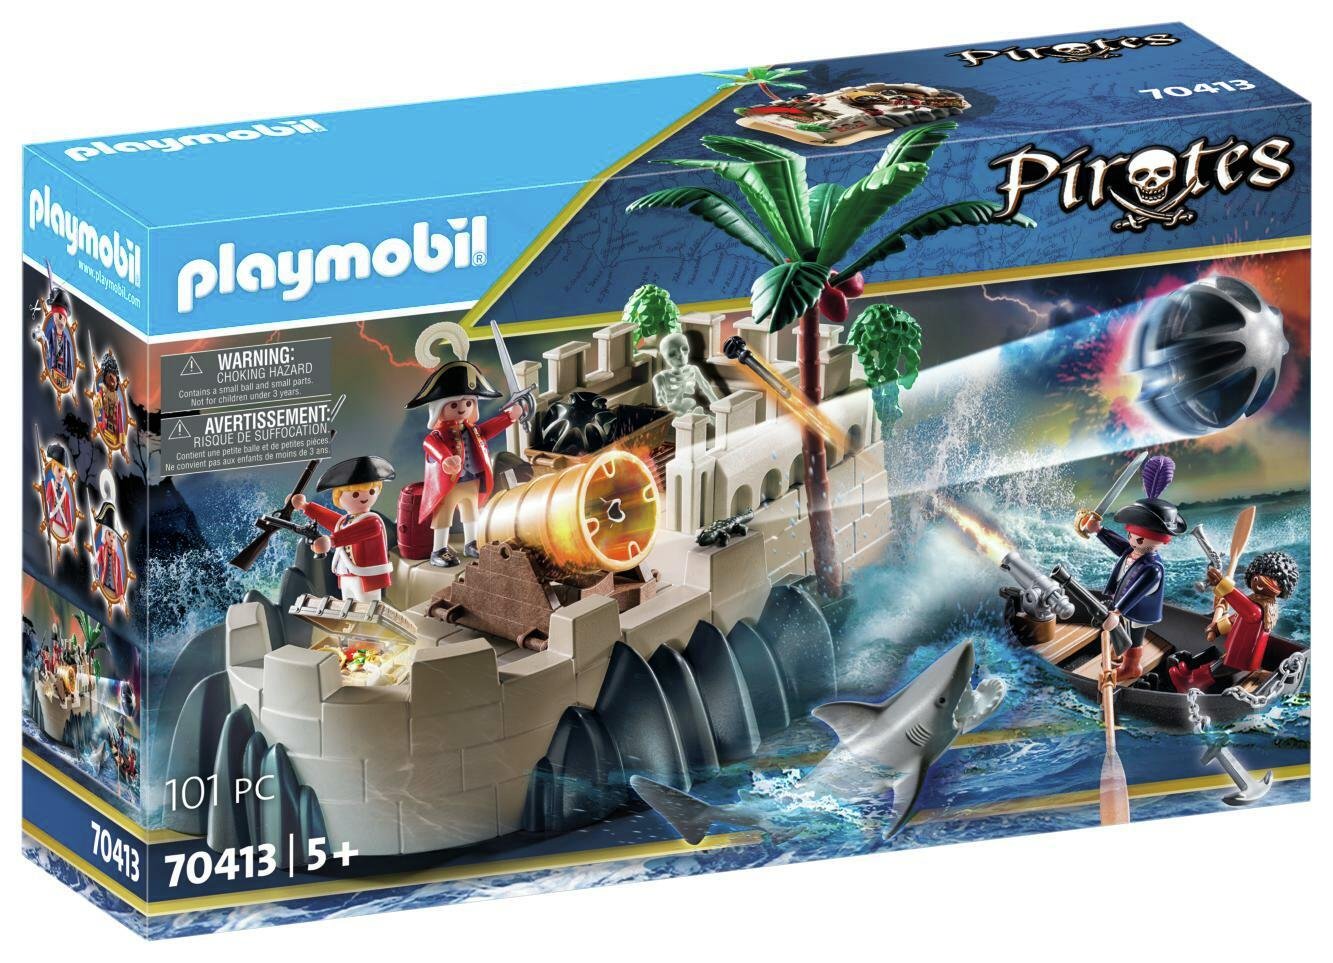 Playmobil 70413 Pirates Redcoat Bastion Review